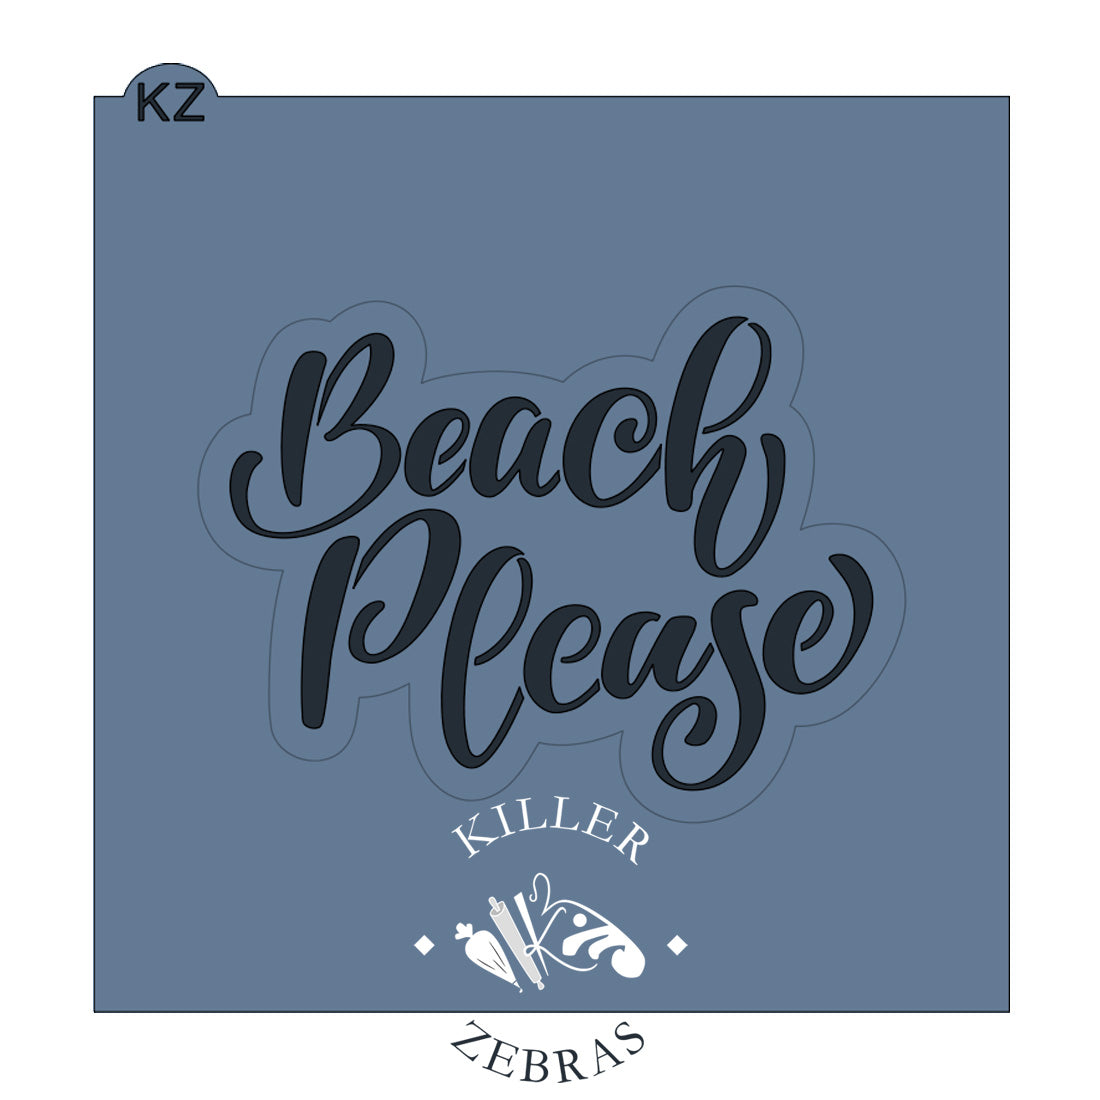 Beach Please Hand Lettered